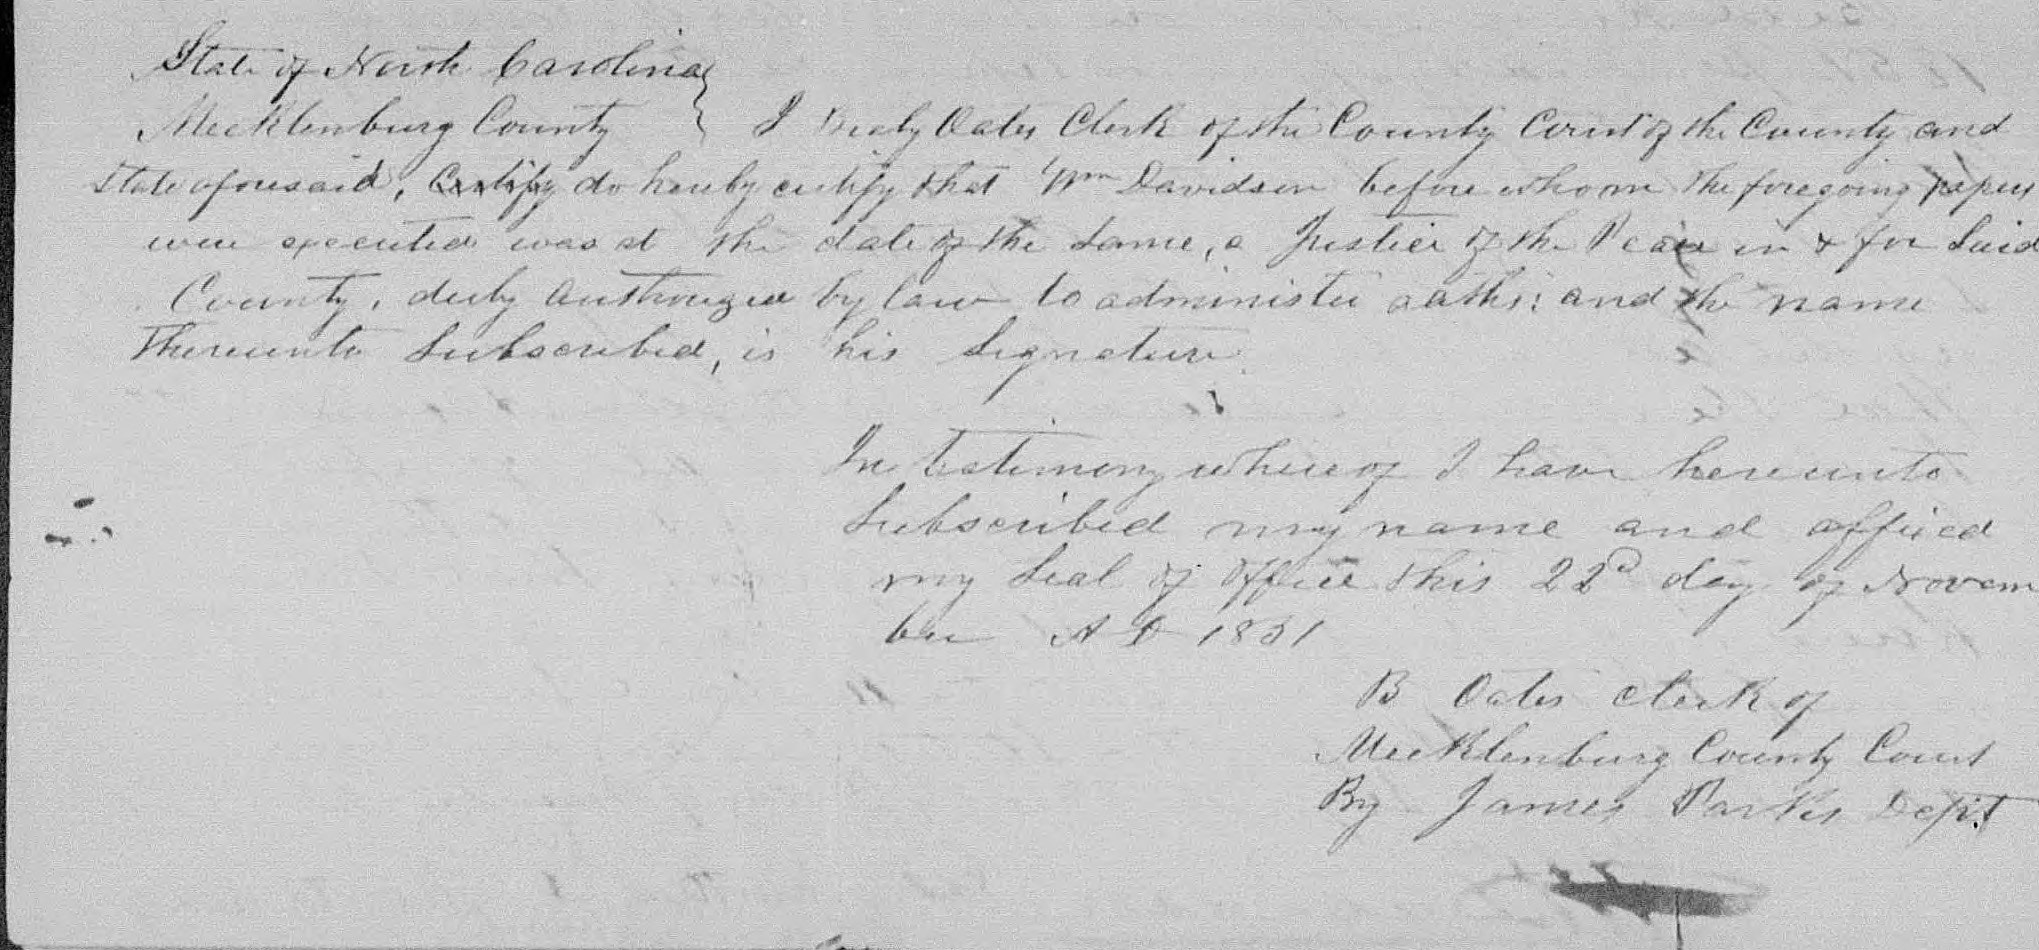 Affidavit of James A. Todd in support of a Pension Claim for Susana Alexander, 19 November 1851, page 2